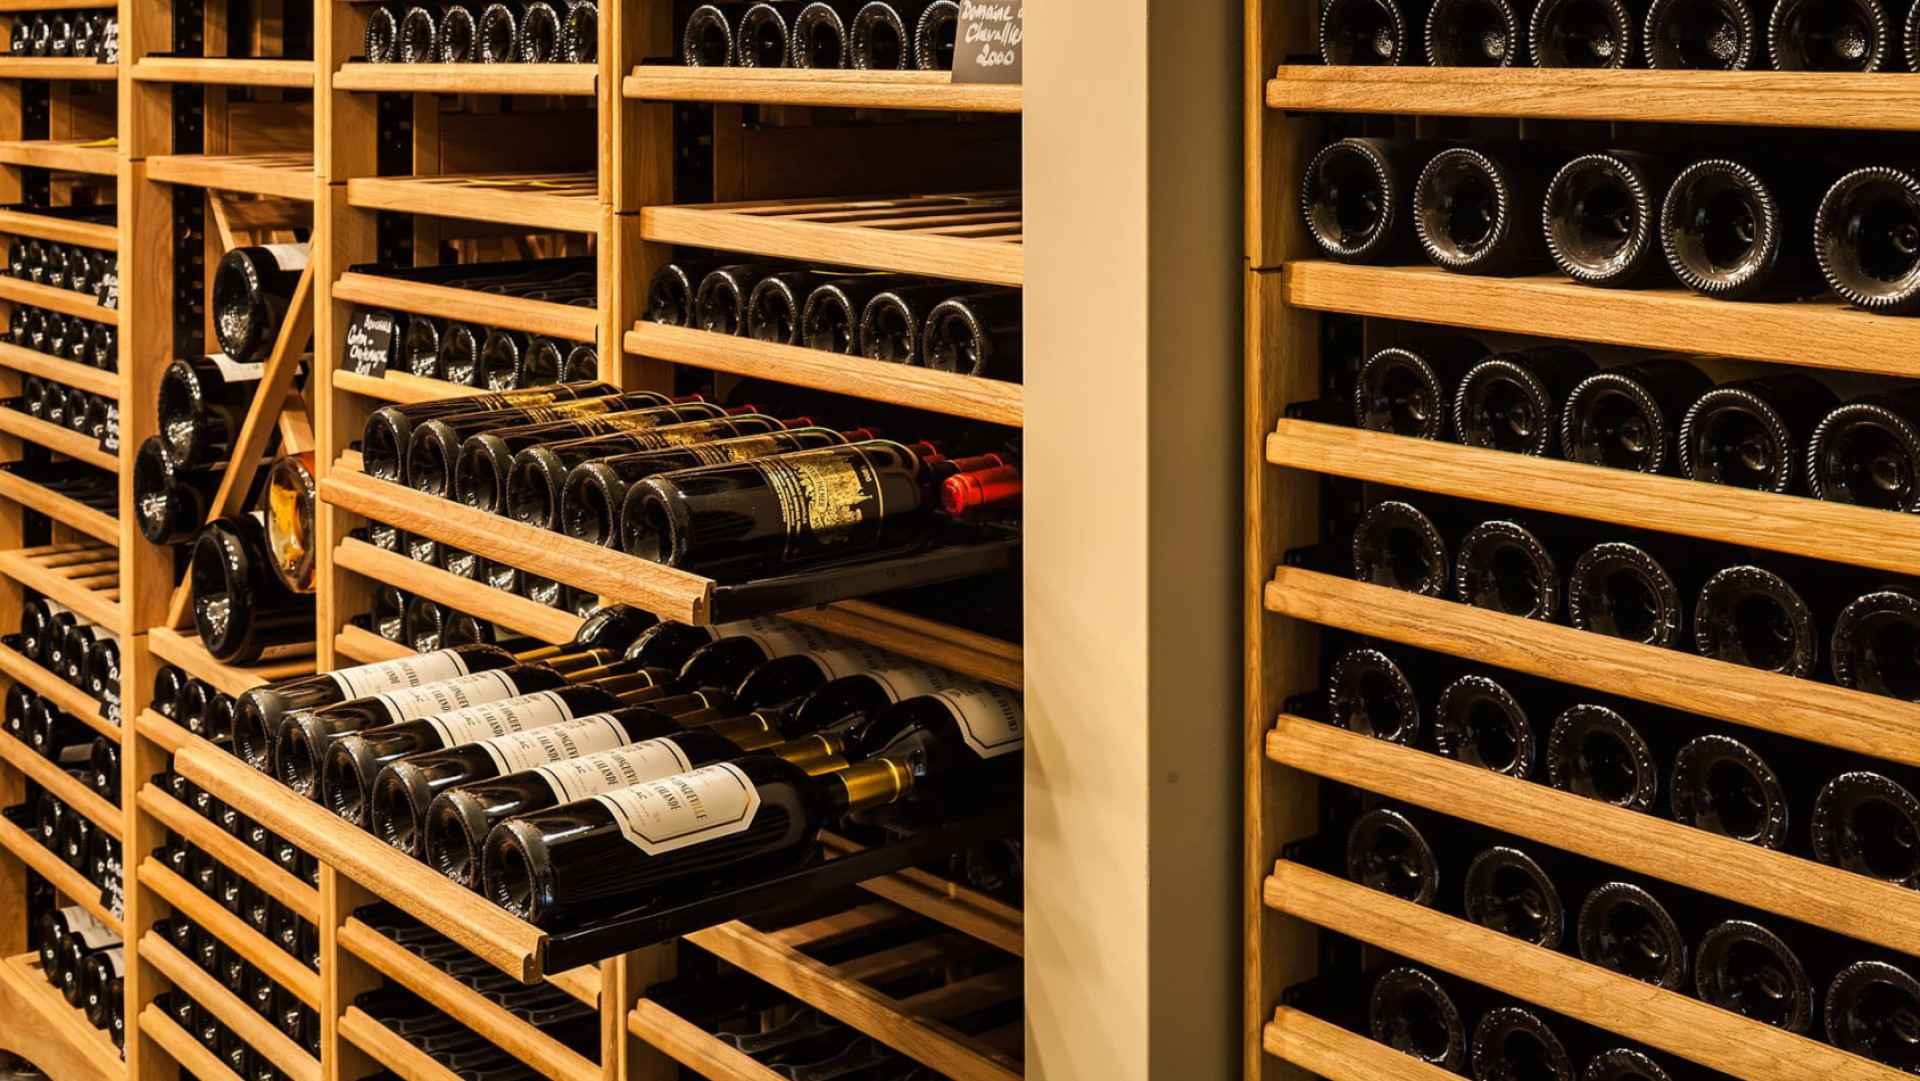 Furniture for restaurants, hotels or wine bars that manage a cellar with numerous wine references in stock or decorative and robust shelf modules and displays for wine merchants or businesses that wish to highlight their wine offering on the shelves.